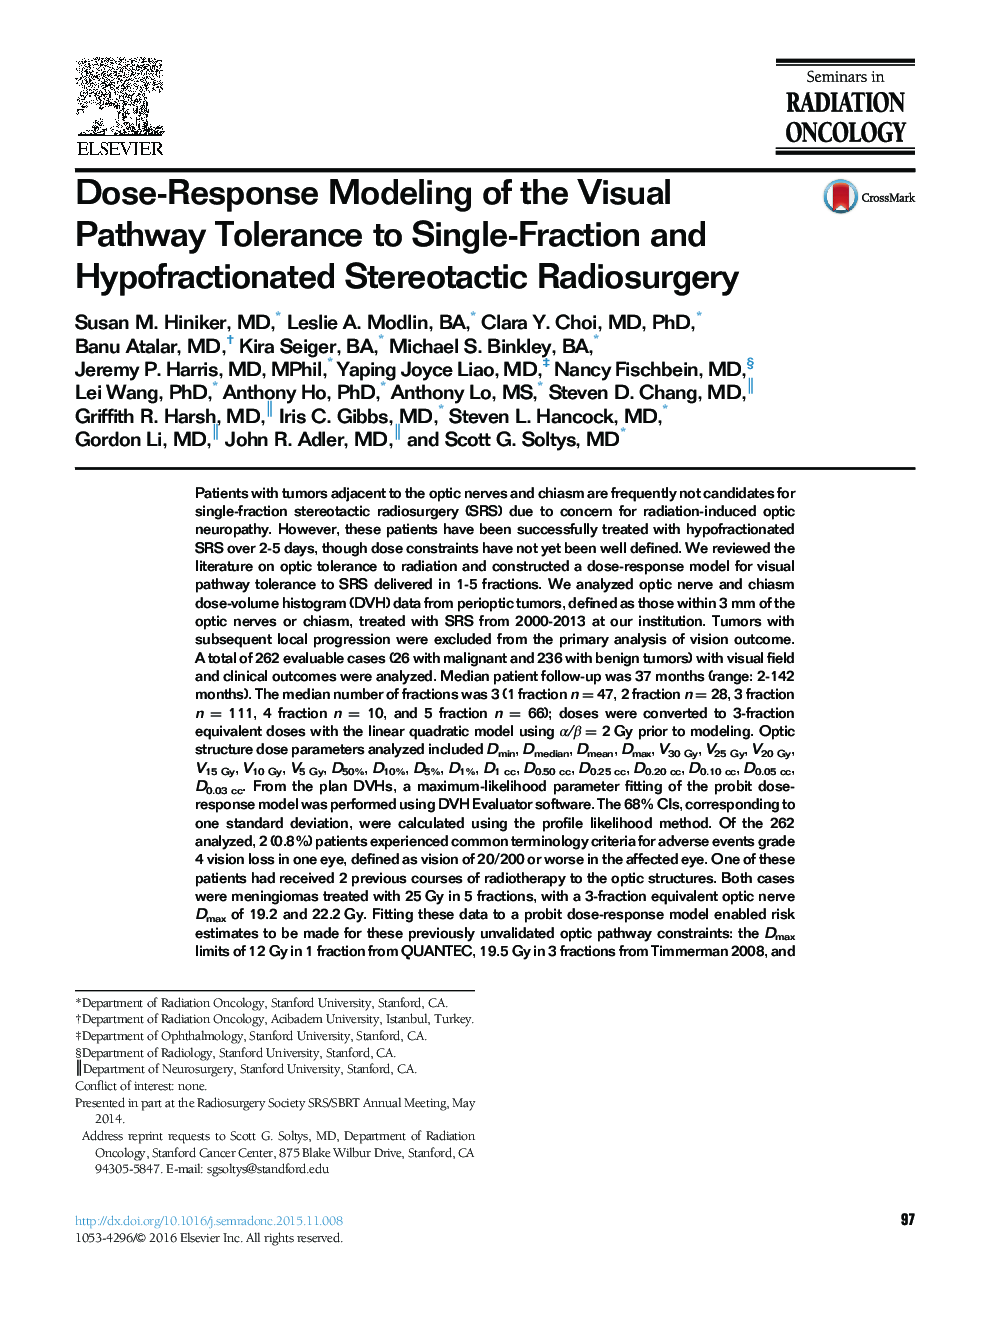 Dose-Response Modeling of the Visual Pathway Tolerance to Single-Fraction and Hypofractionated Stereotactic Radiosurgery 